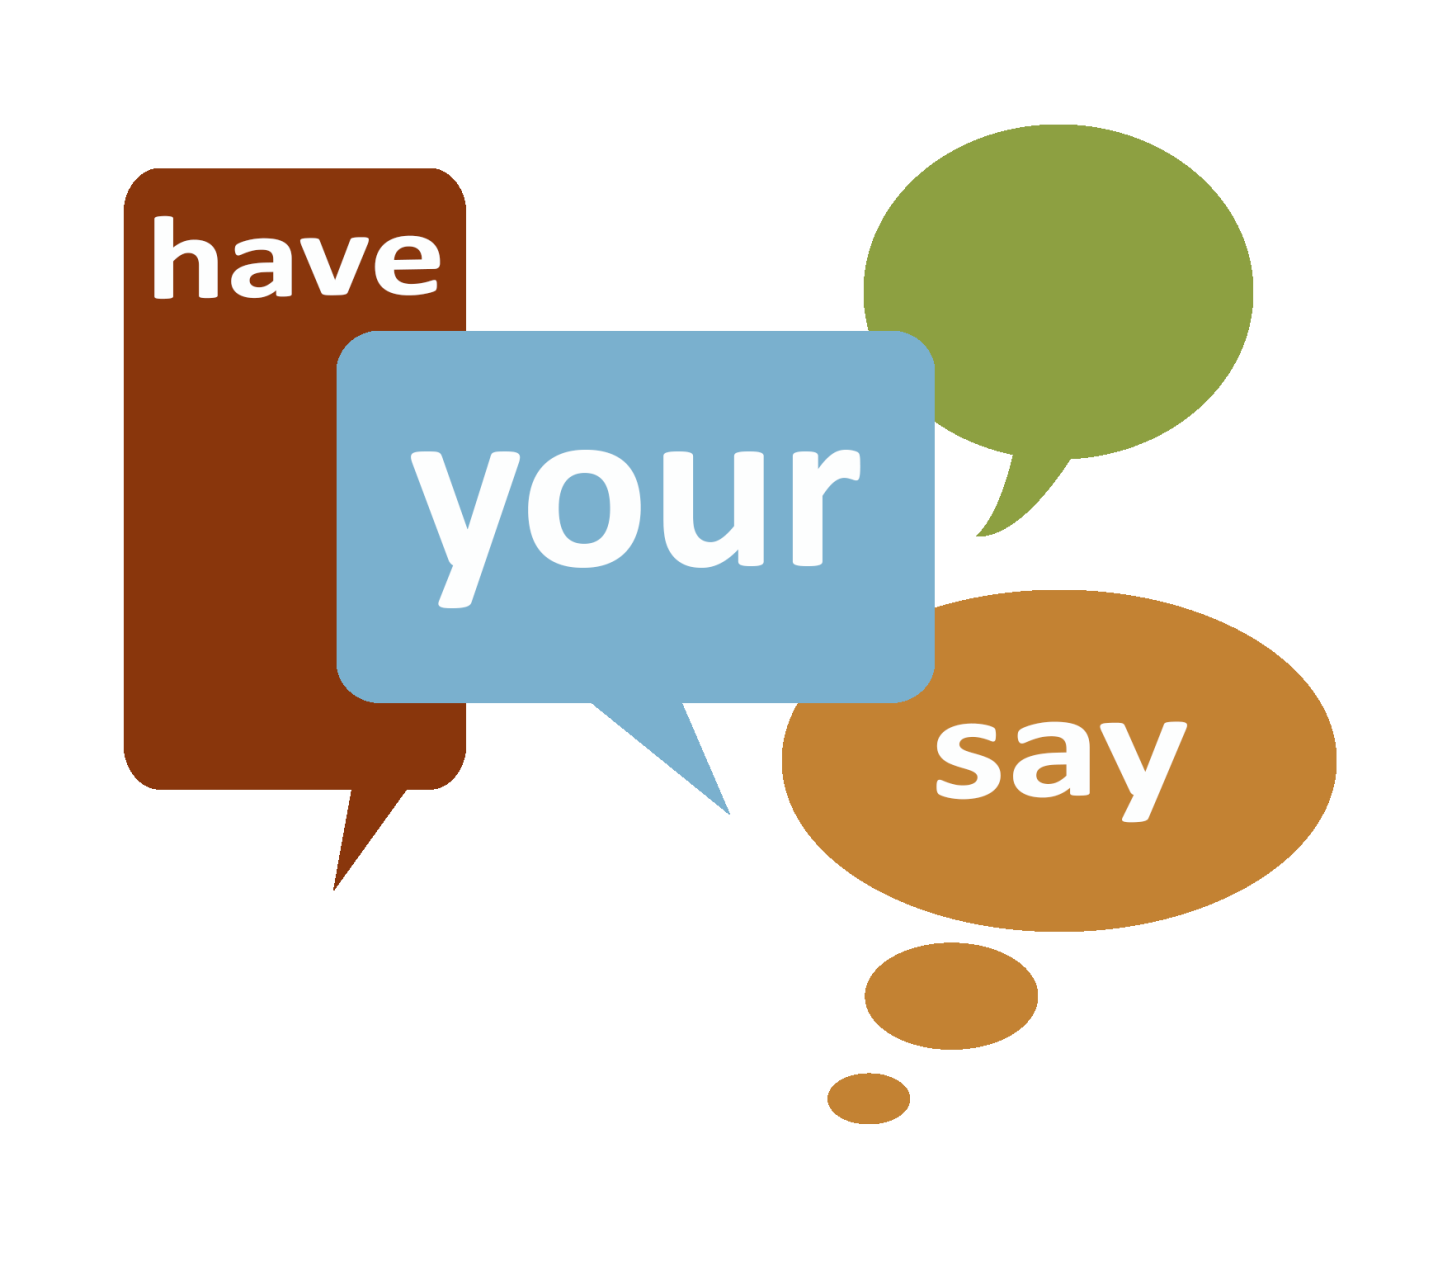 Have Your Say - Community Workshop and Survey